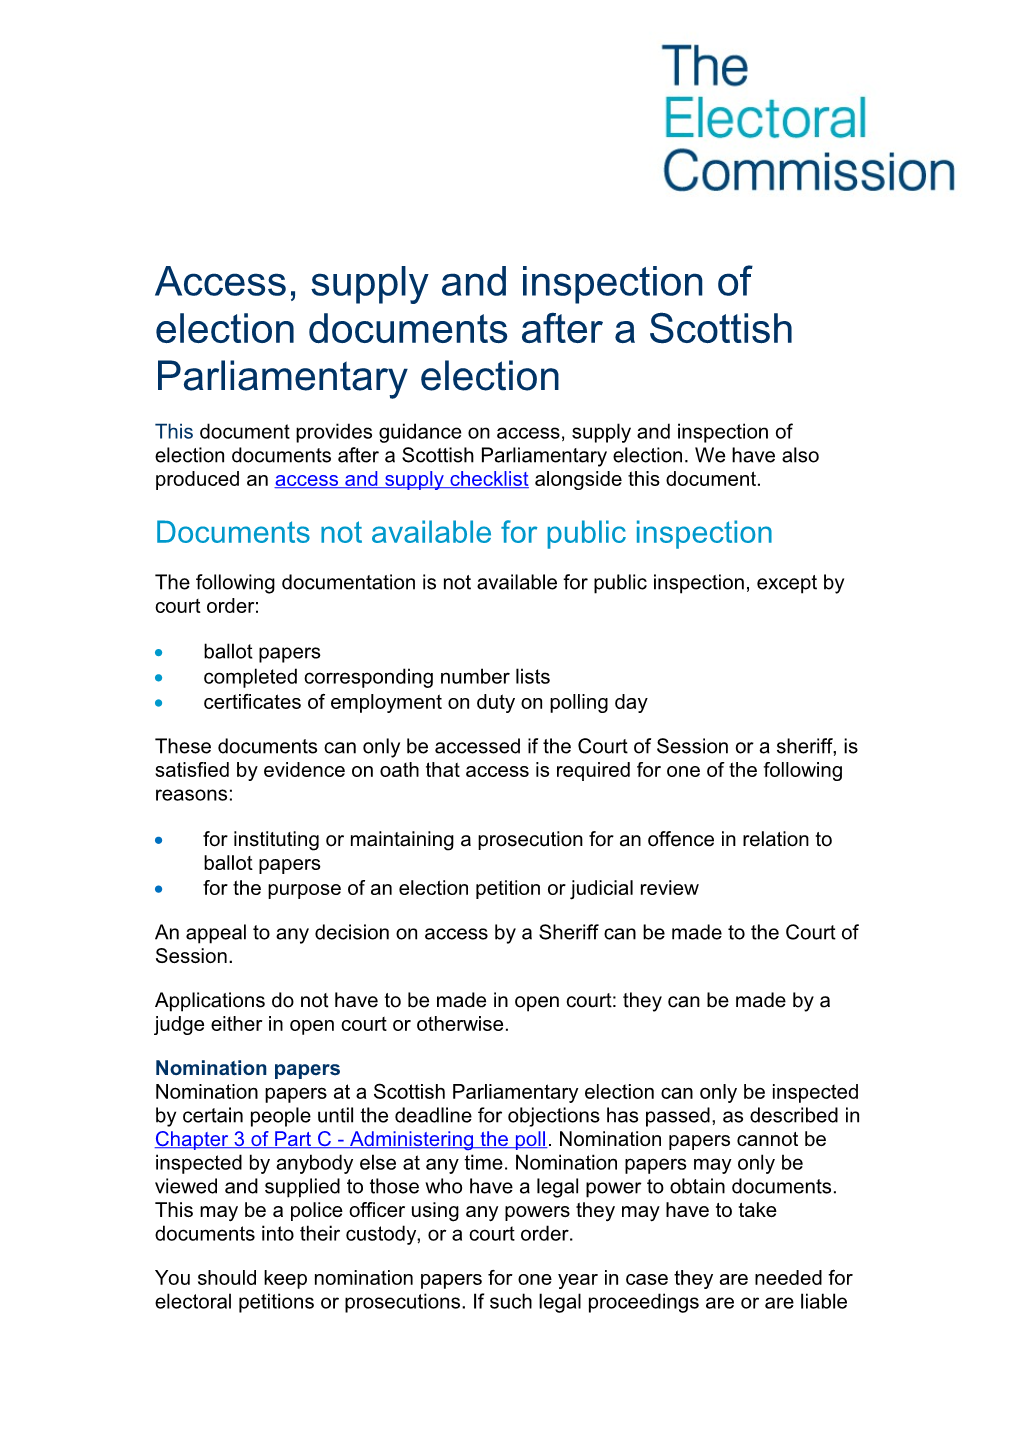 SP Guidance on the Retention and Inspection of Election Documents